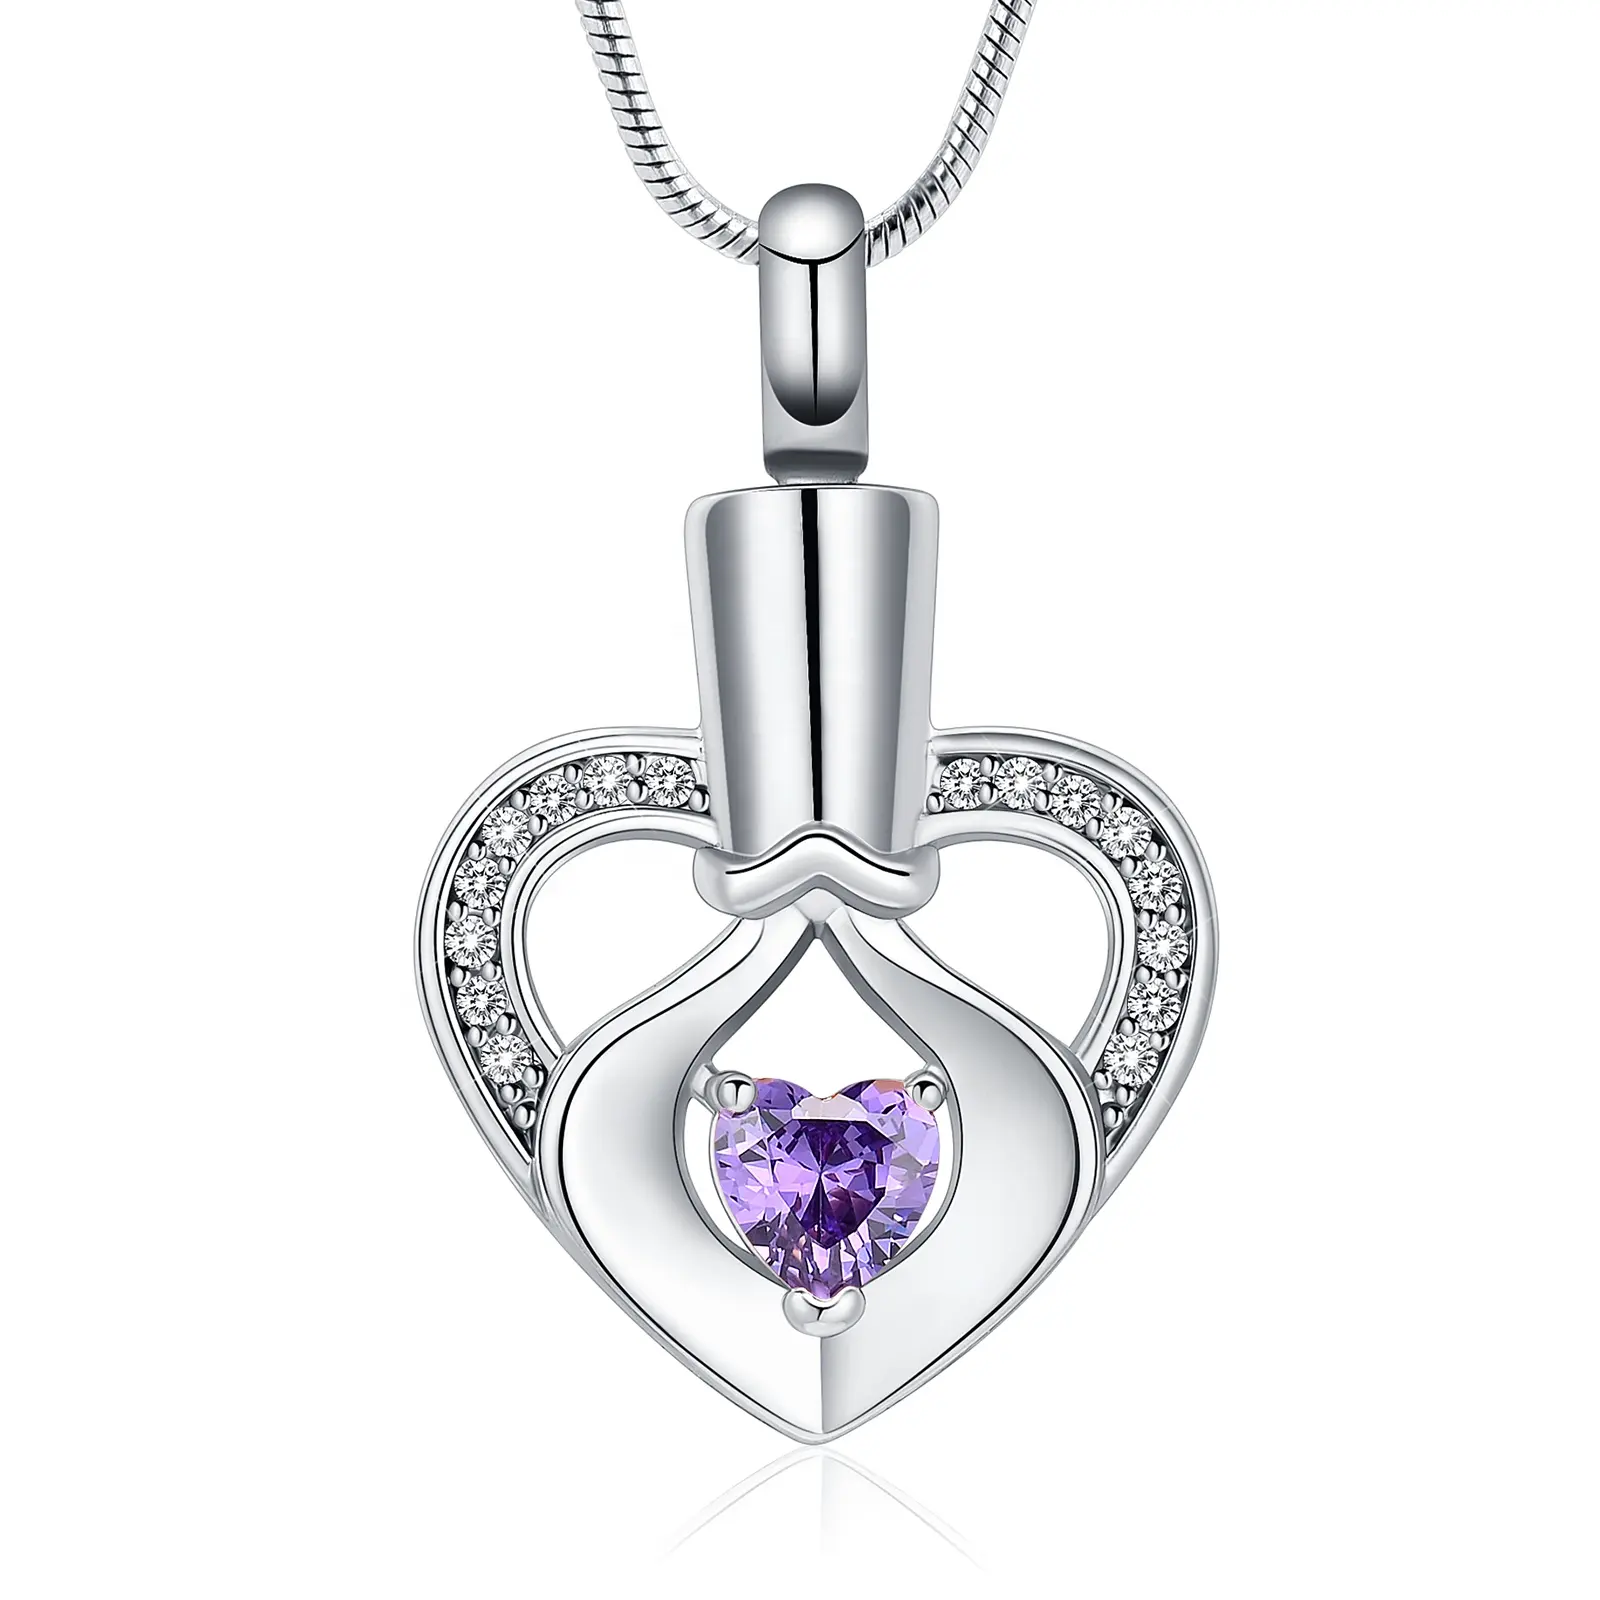 IJD40023 New Arrive 316 Stainless Steel Heart Urn Necklace For Ashes For Women Keepsake Cremation Jewelry Hold Crystal Memorial